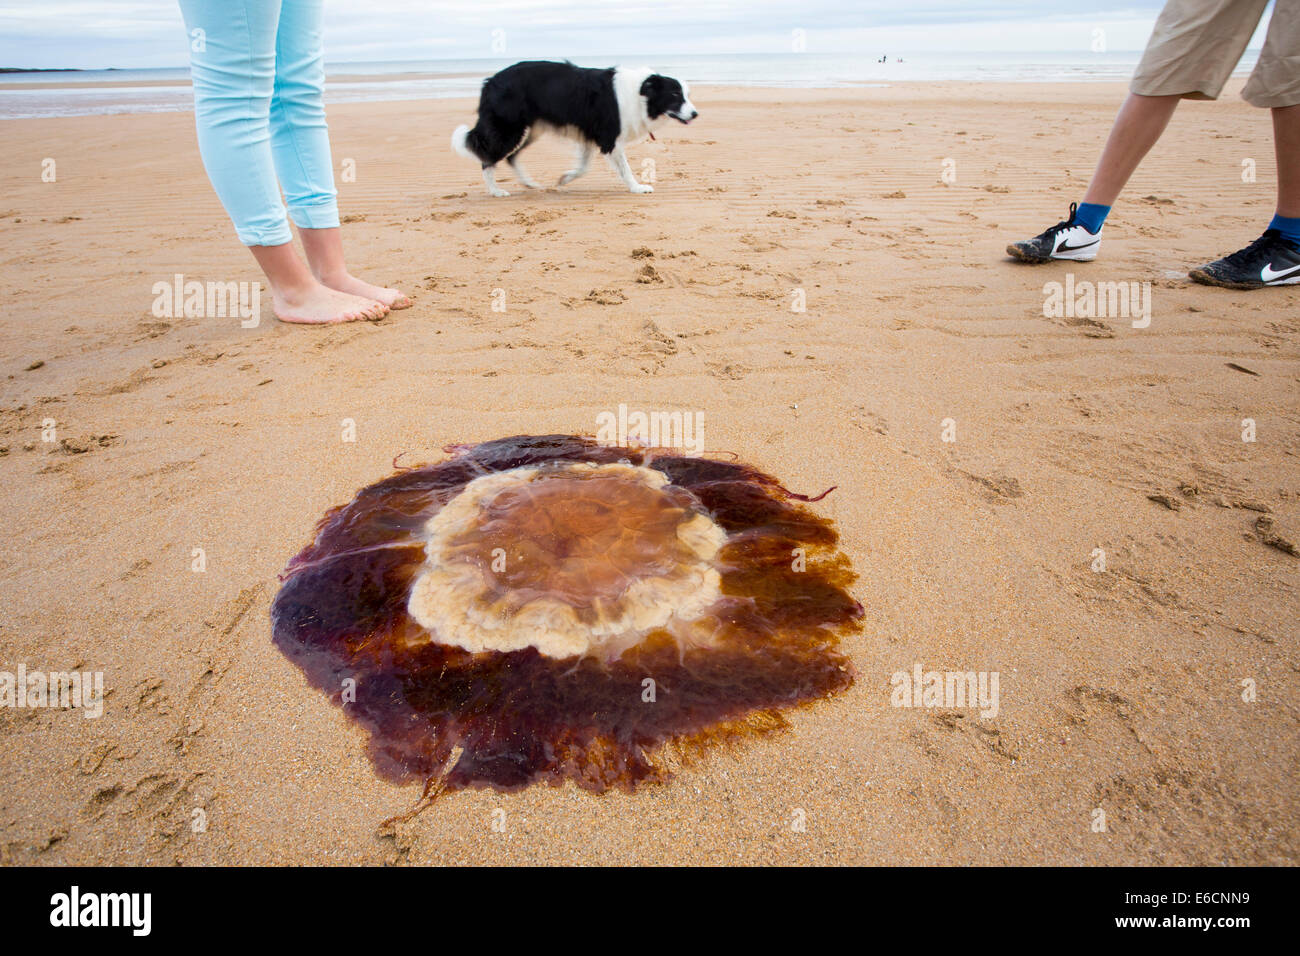 Lions Mane Jellyfish, Cyanea capillata, washed ashore on a Nothumberland Beach. Climate change is causing numbers of Jellyfish to increase around the world. Stock Photo